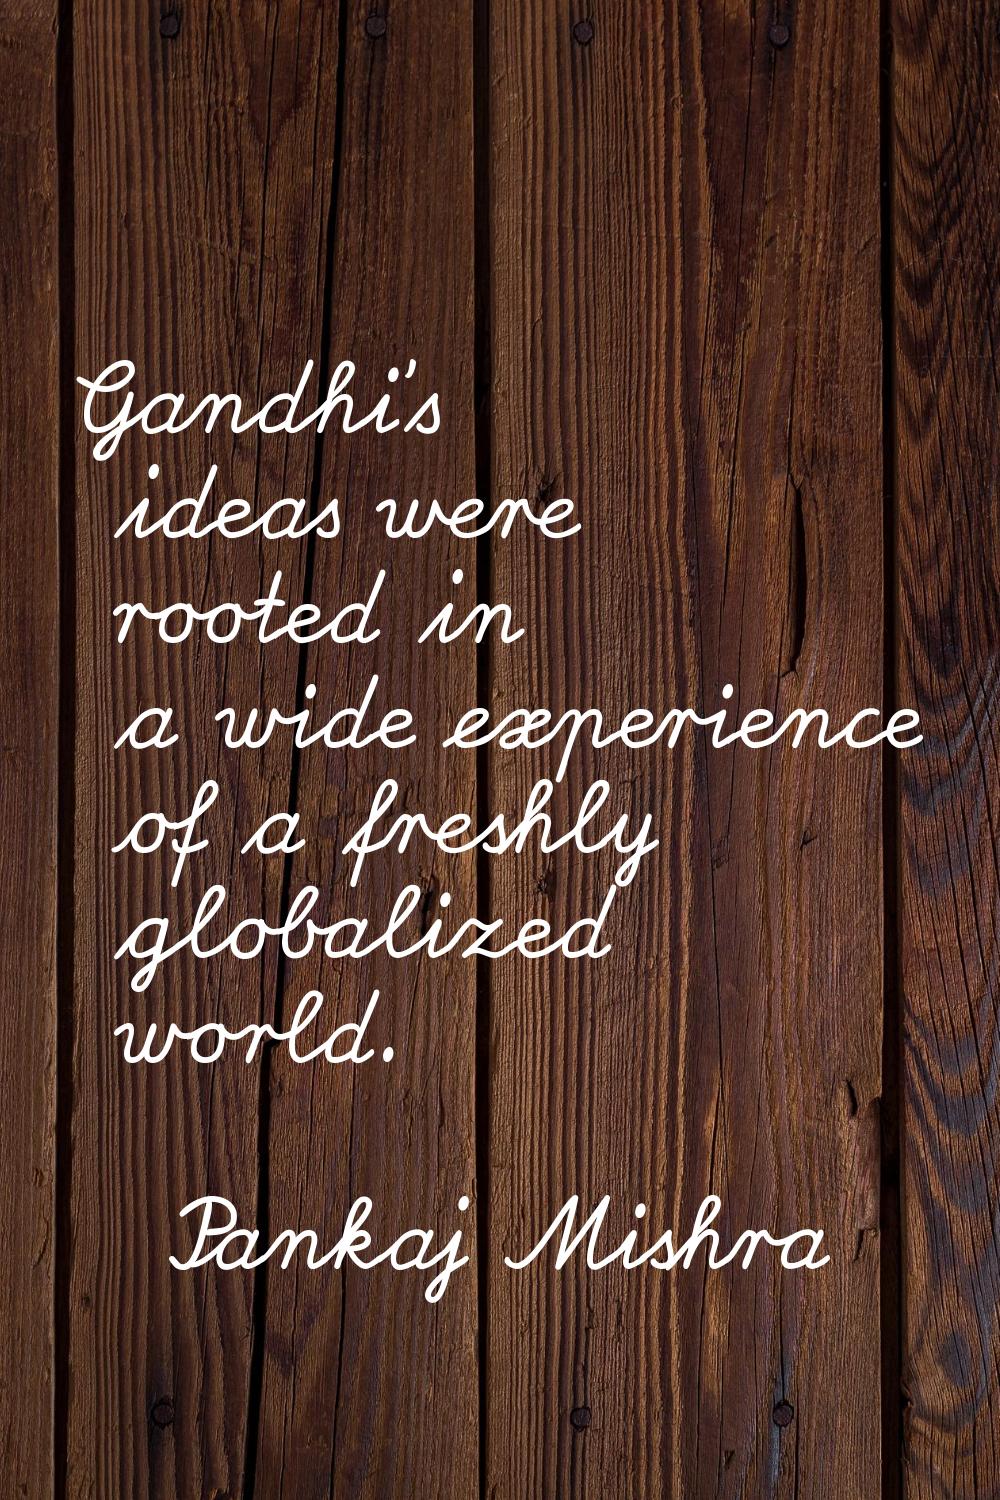 Gandhi's ideas were rooted in a wide experience of a freshly globalized world.